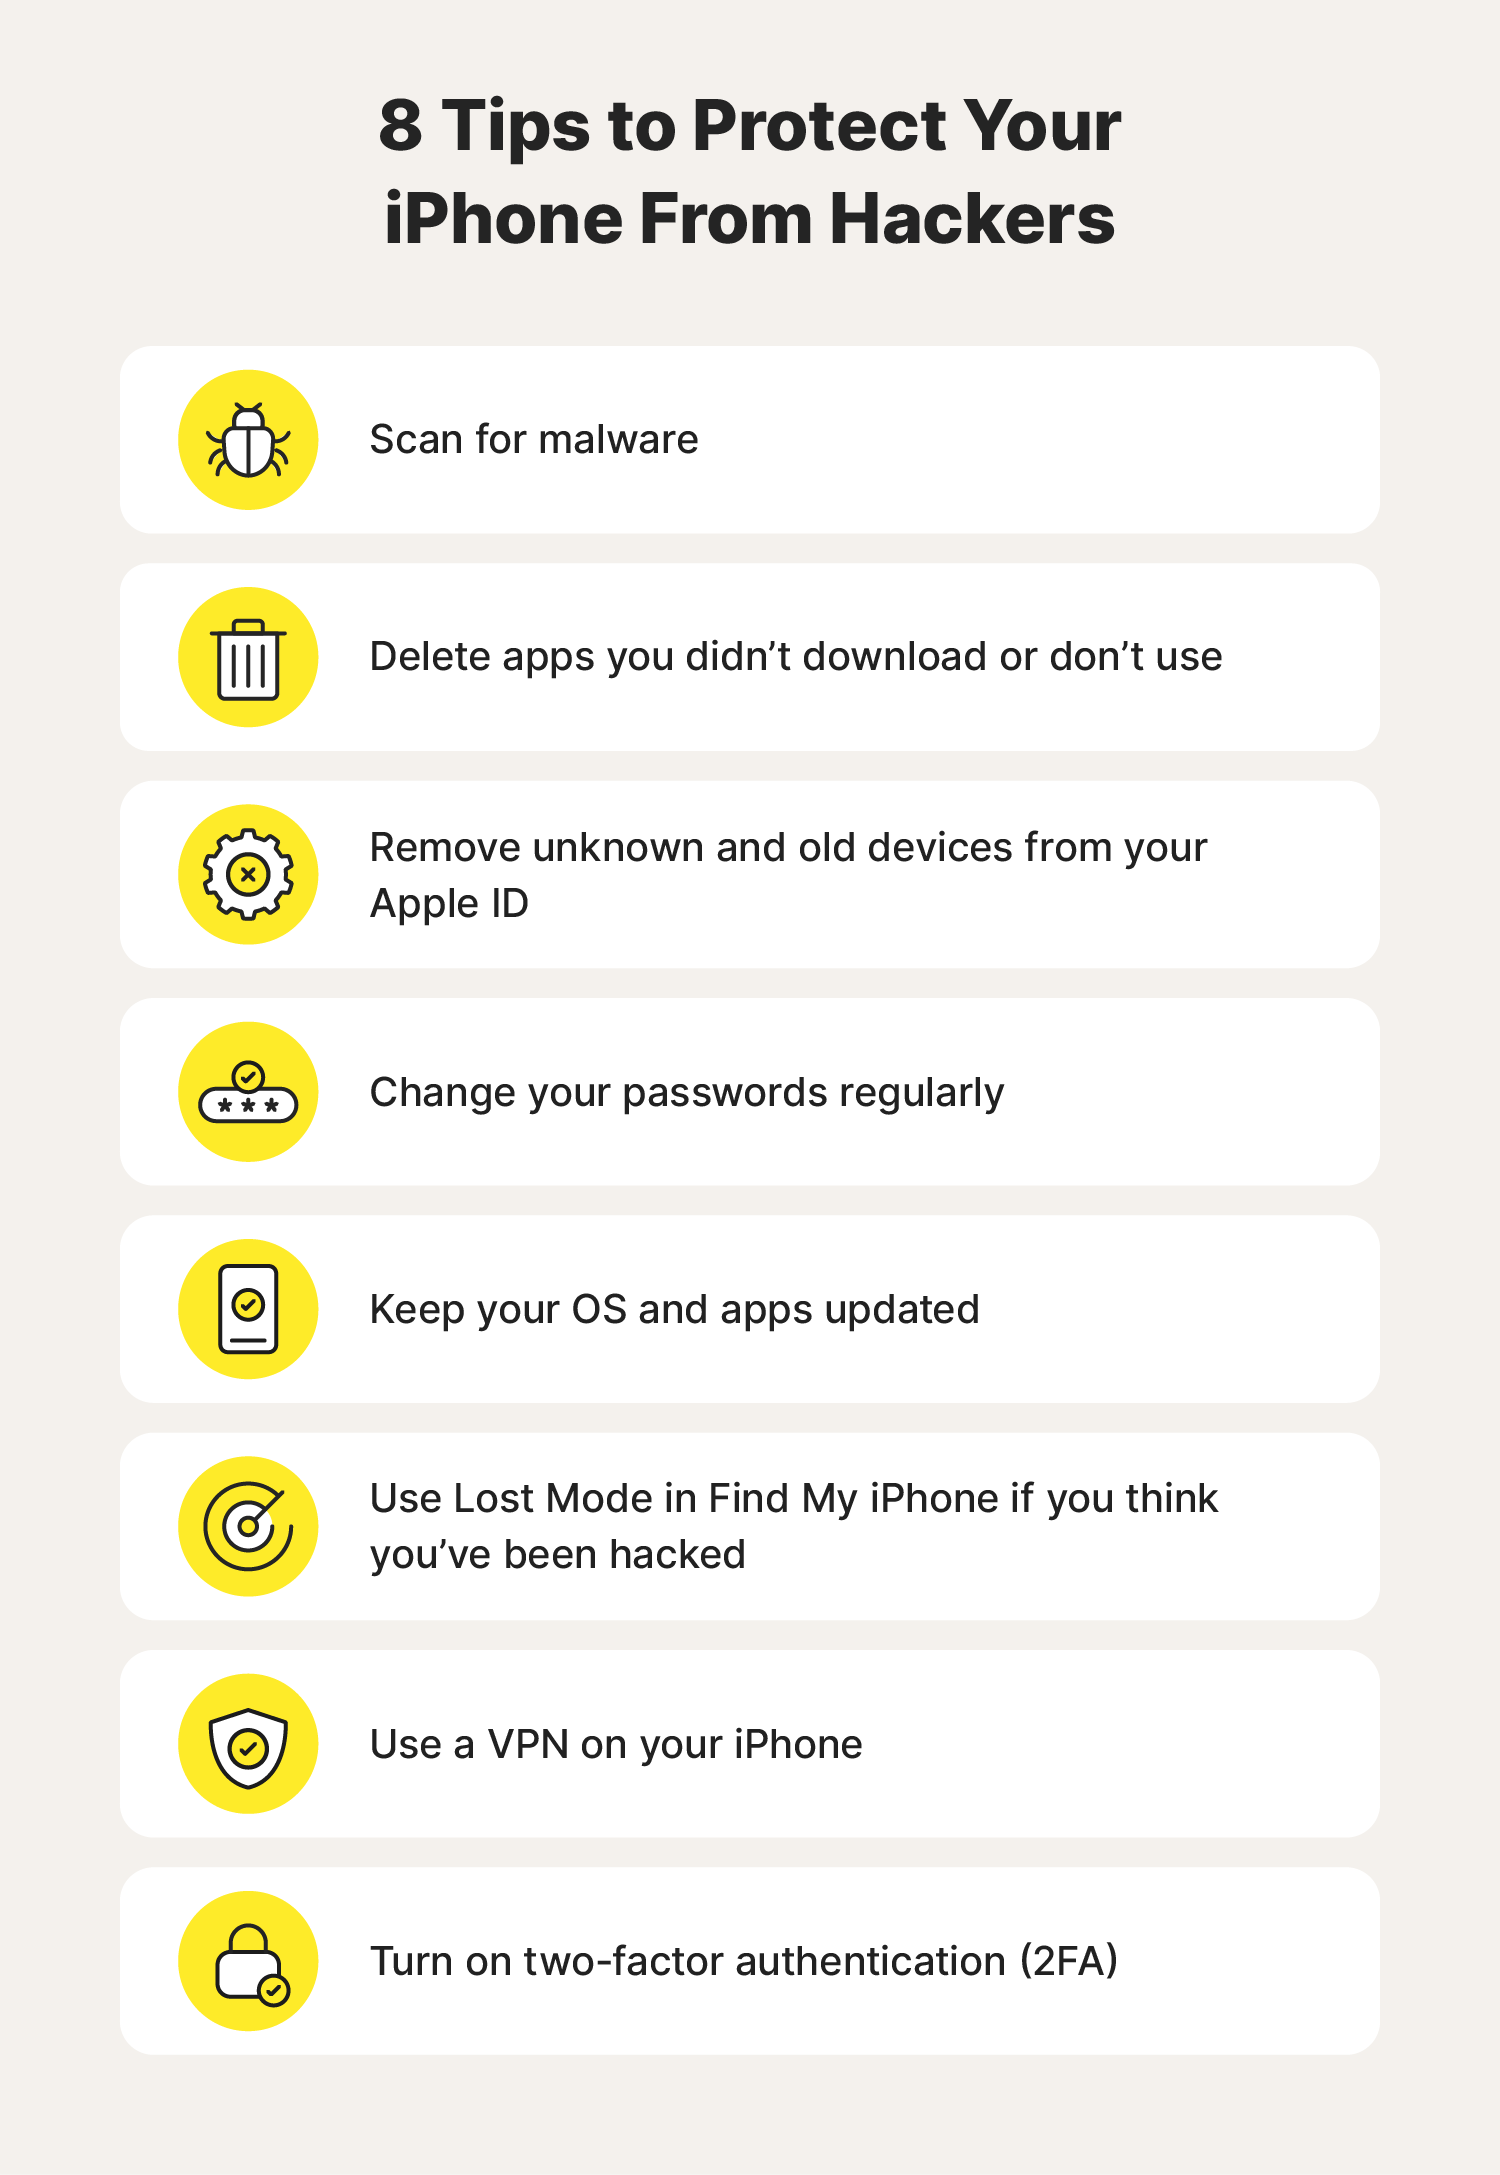 Illustrated chart with 8 tips for how to protect your iPhone from hackers.